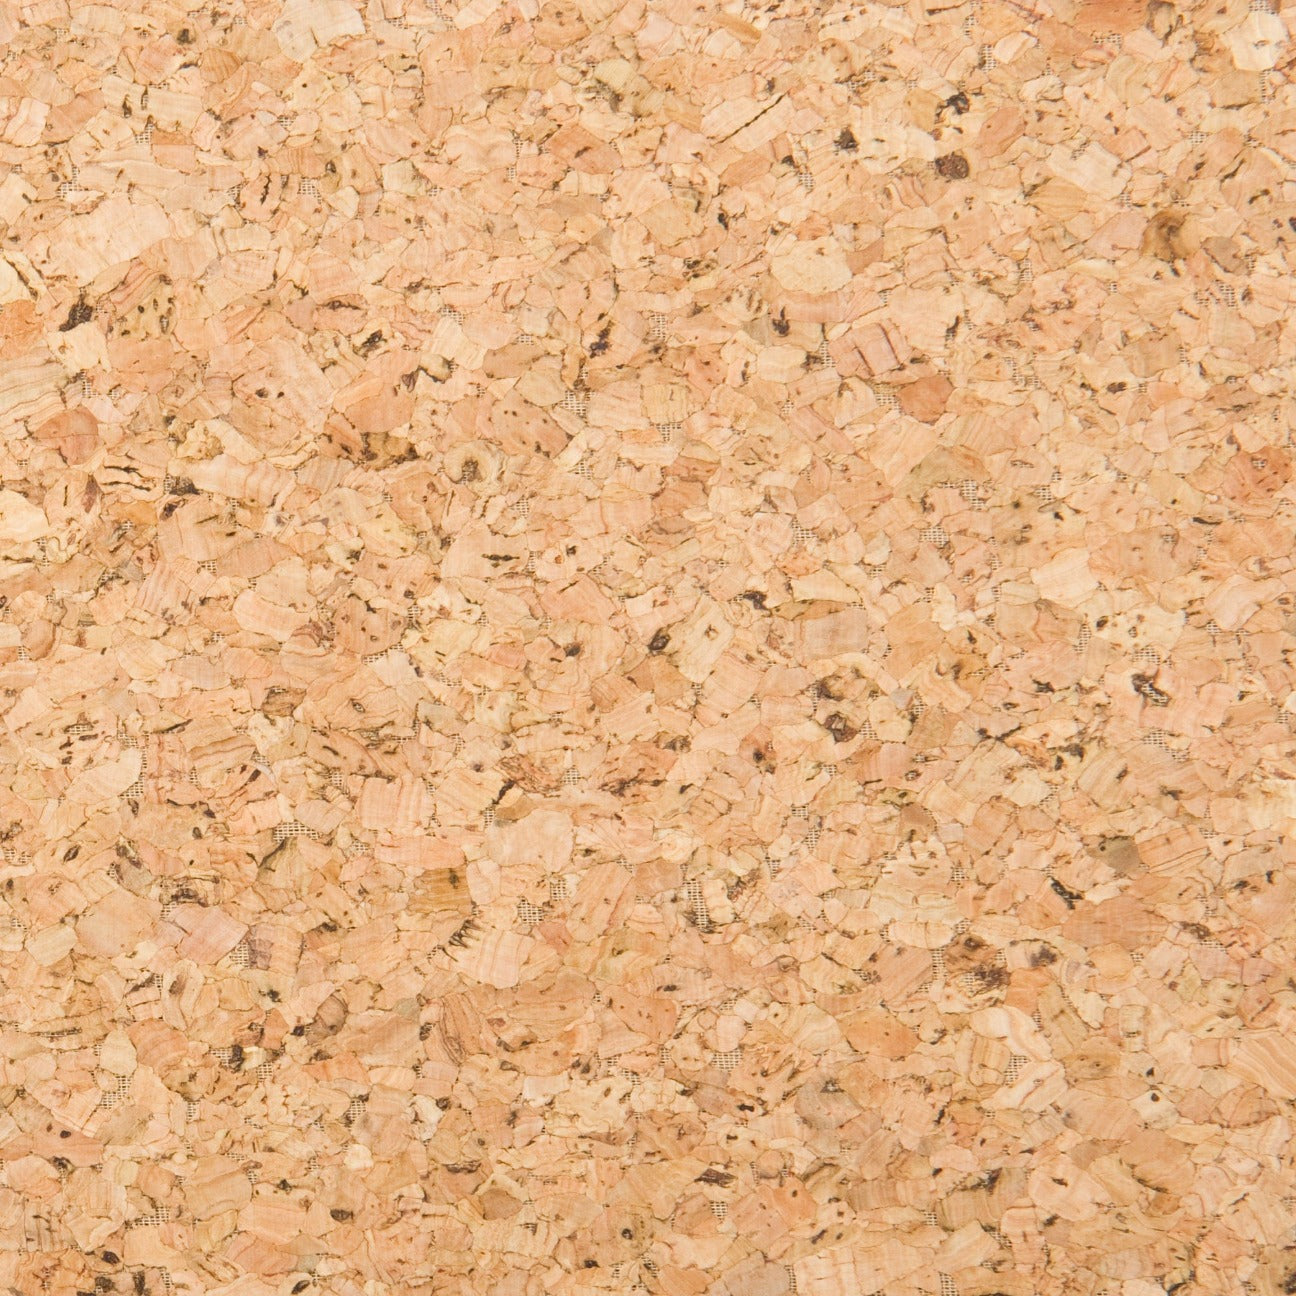 An up close view of the top of our Jelinek cork yoga mat showing the slightly textured cork surface.